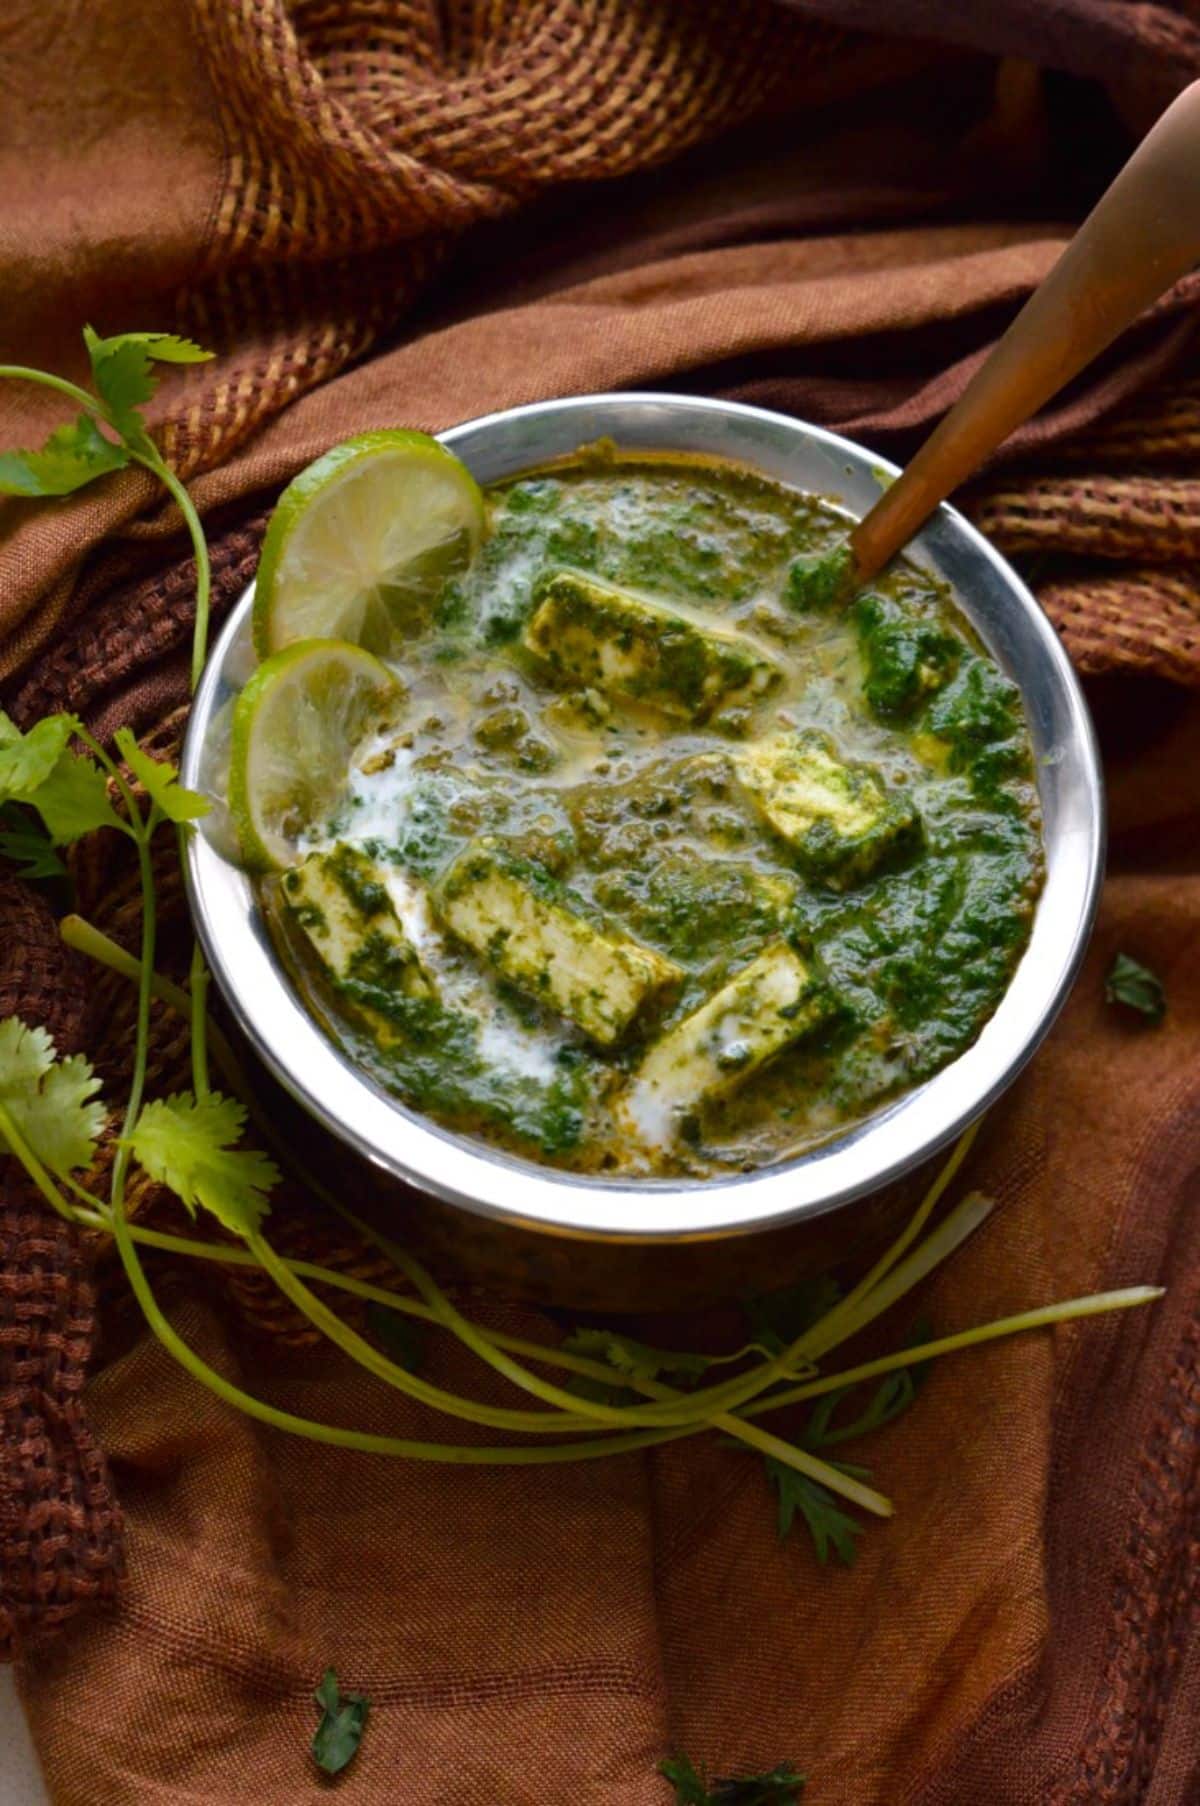 Saag Paneer dish in a bowl with a spoon.